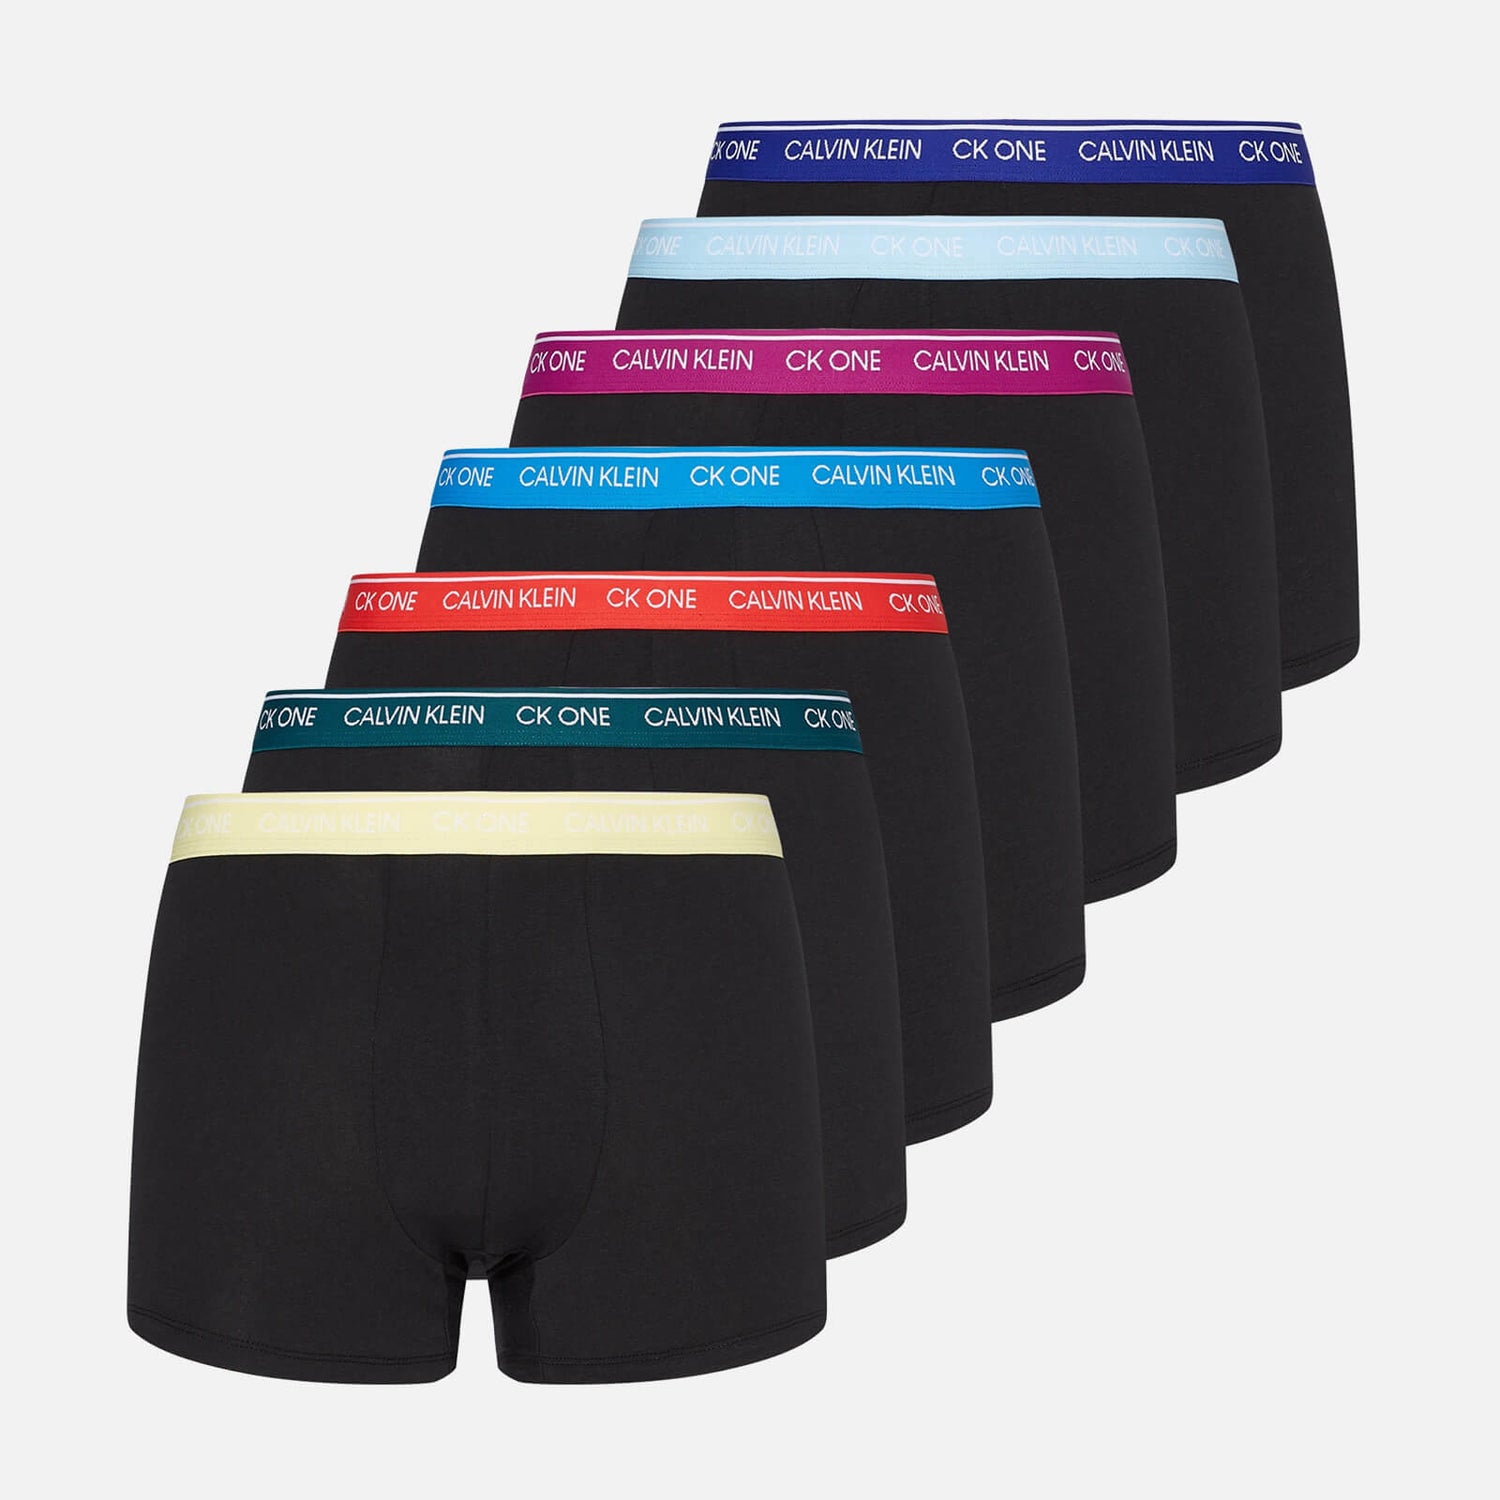 Calvin Klein Men's Cotton Stretch 7 Pack Trunks with Contrast Waistband - Multi